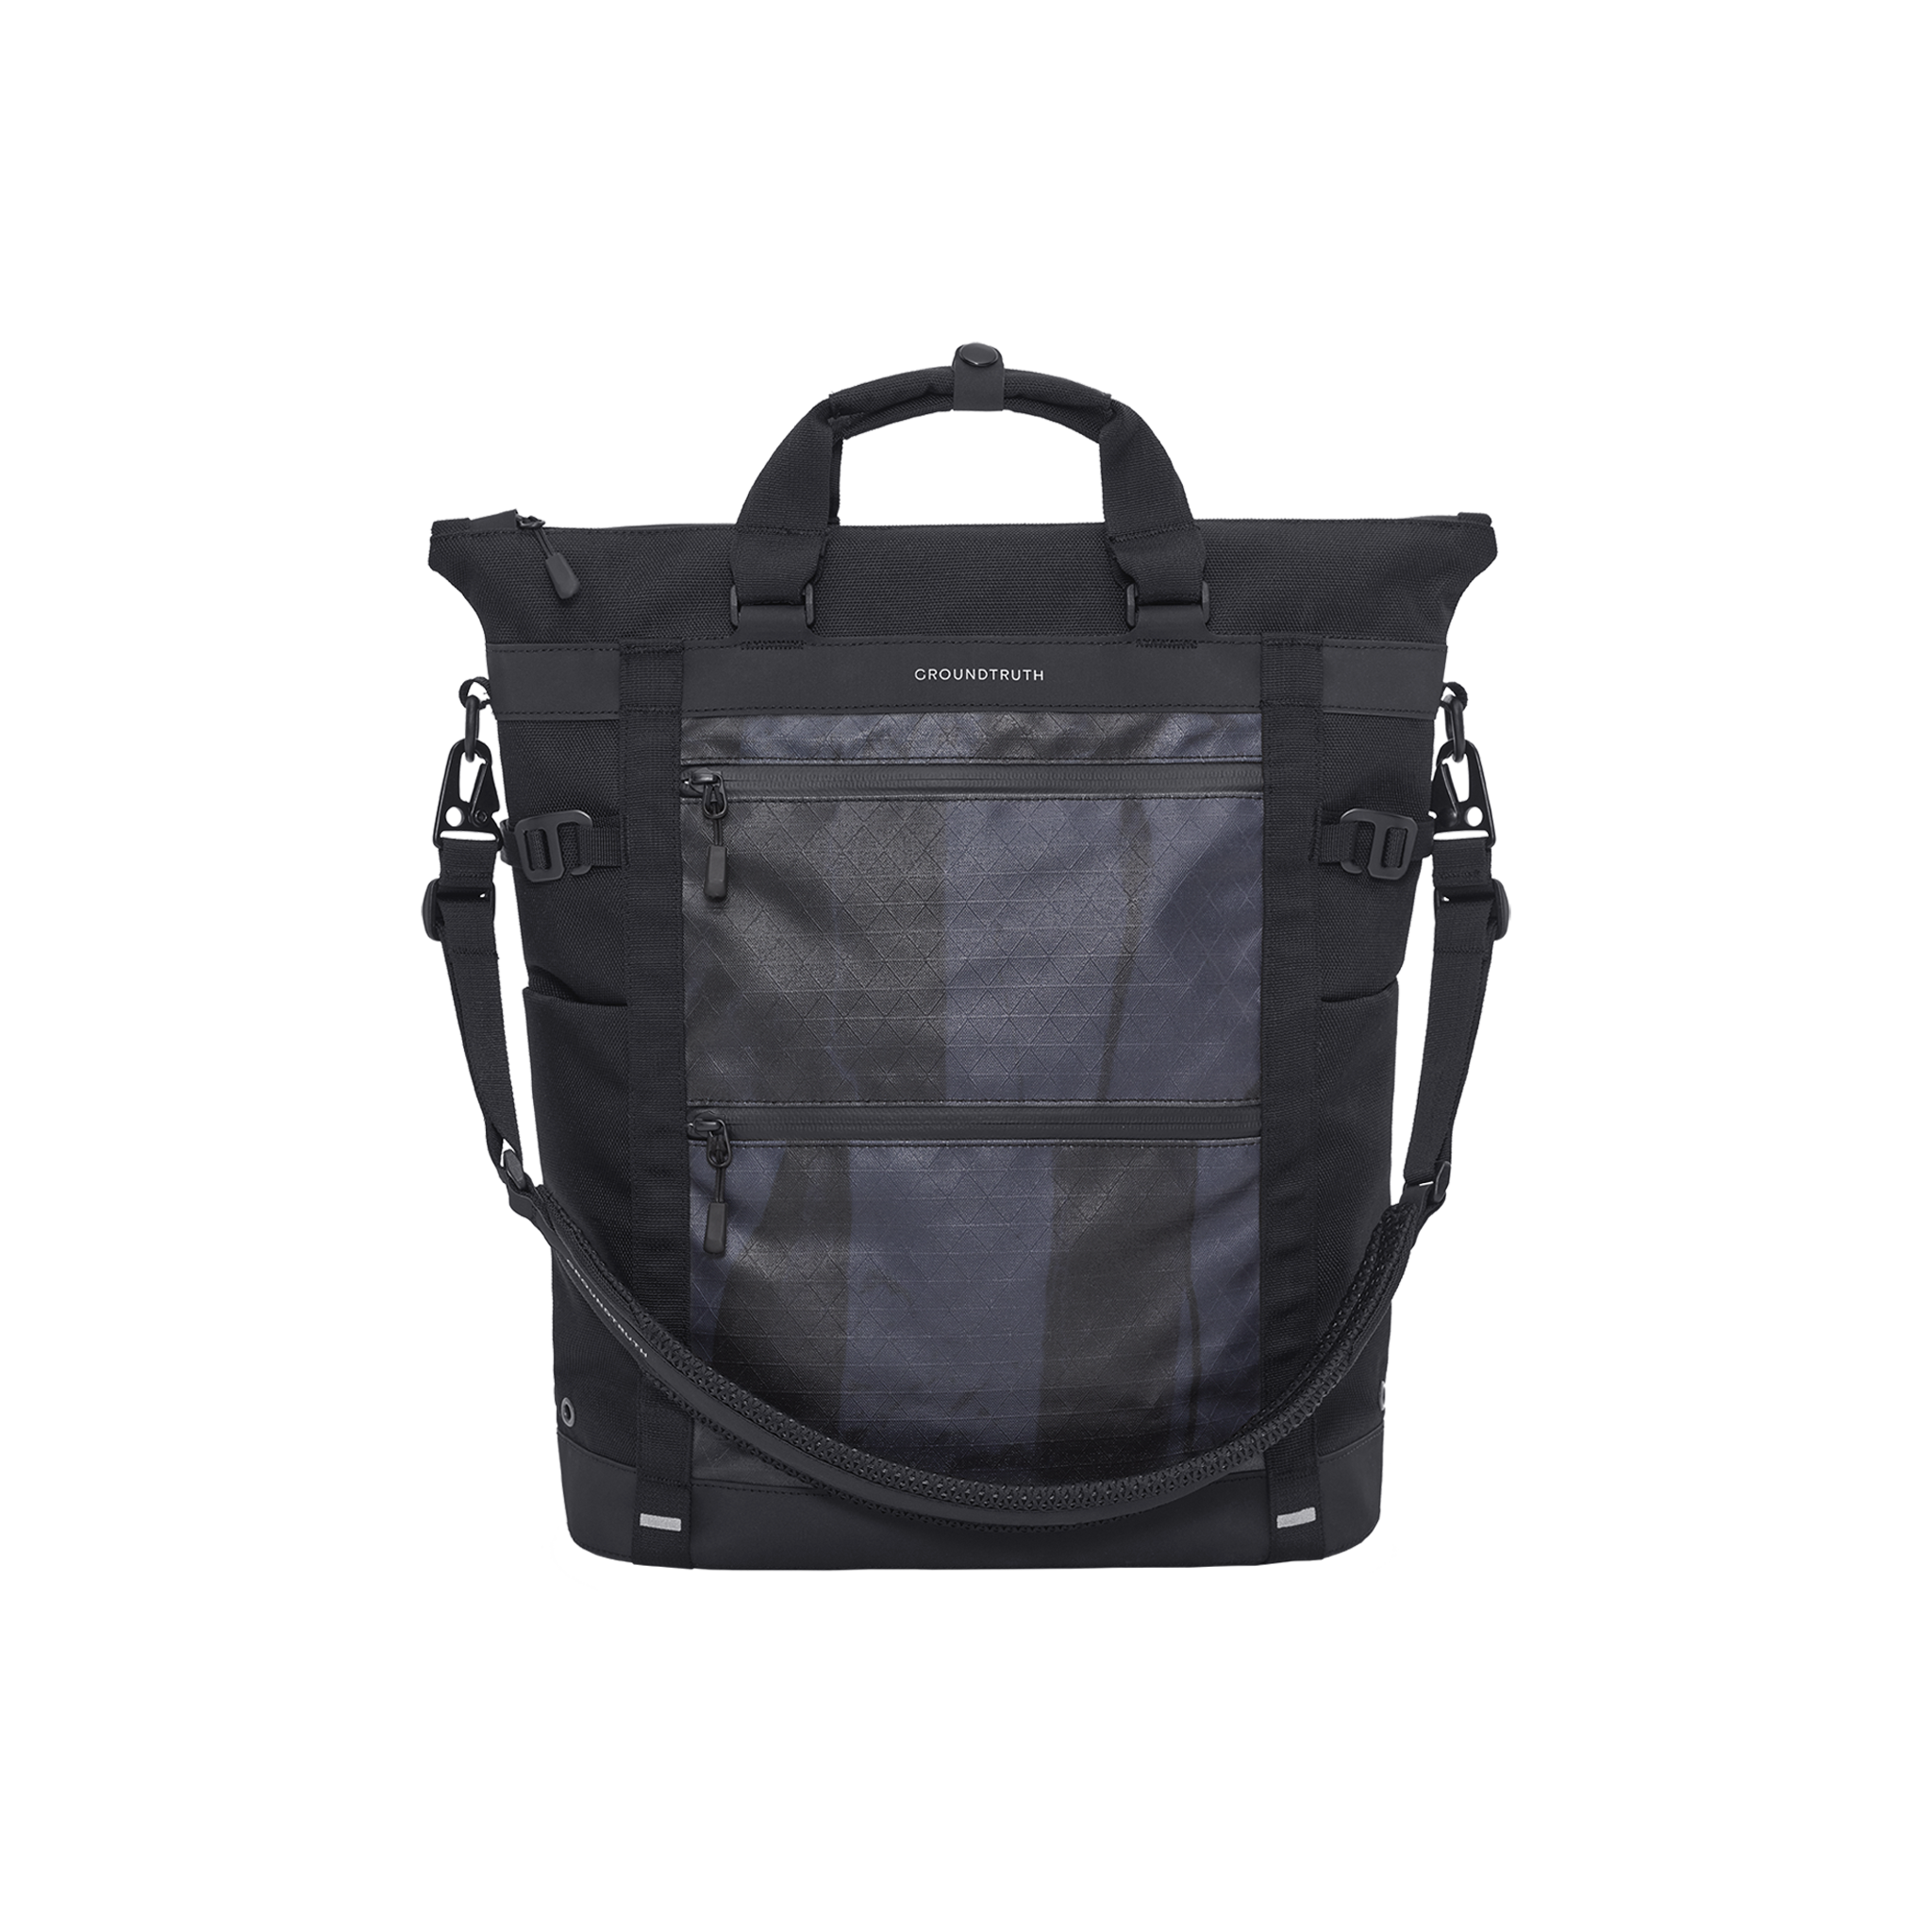 GROUNDTRUTH GLOBAL RIKR 17L Technical Tote 